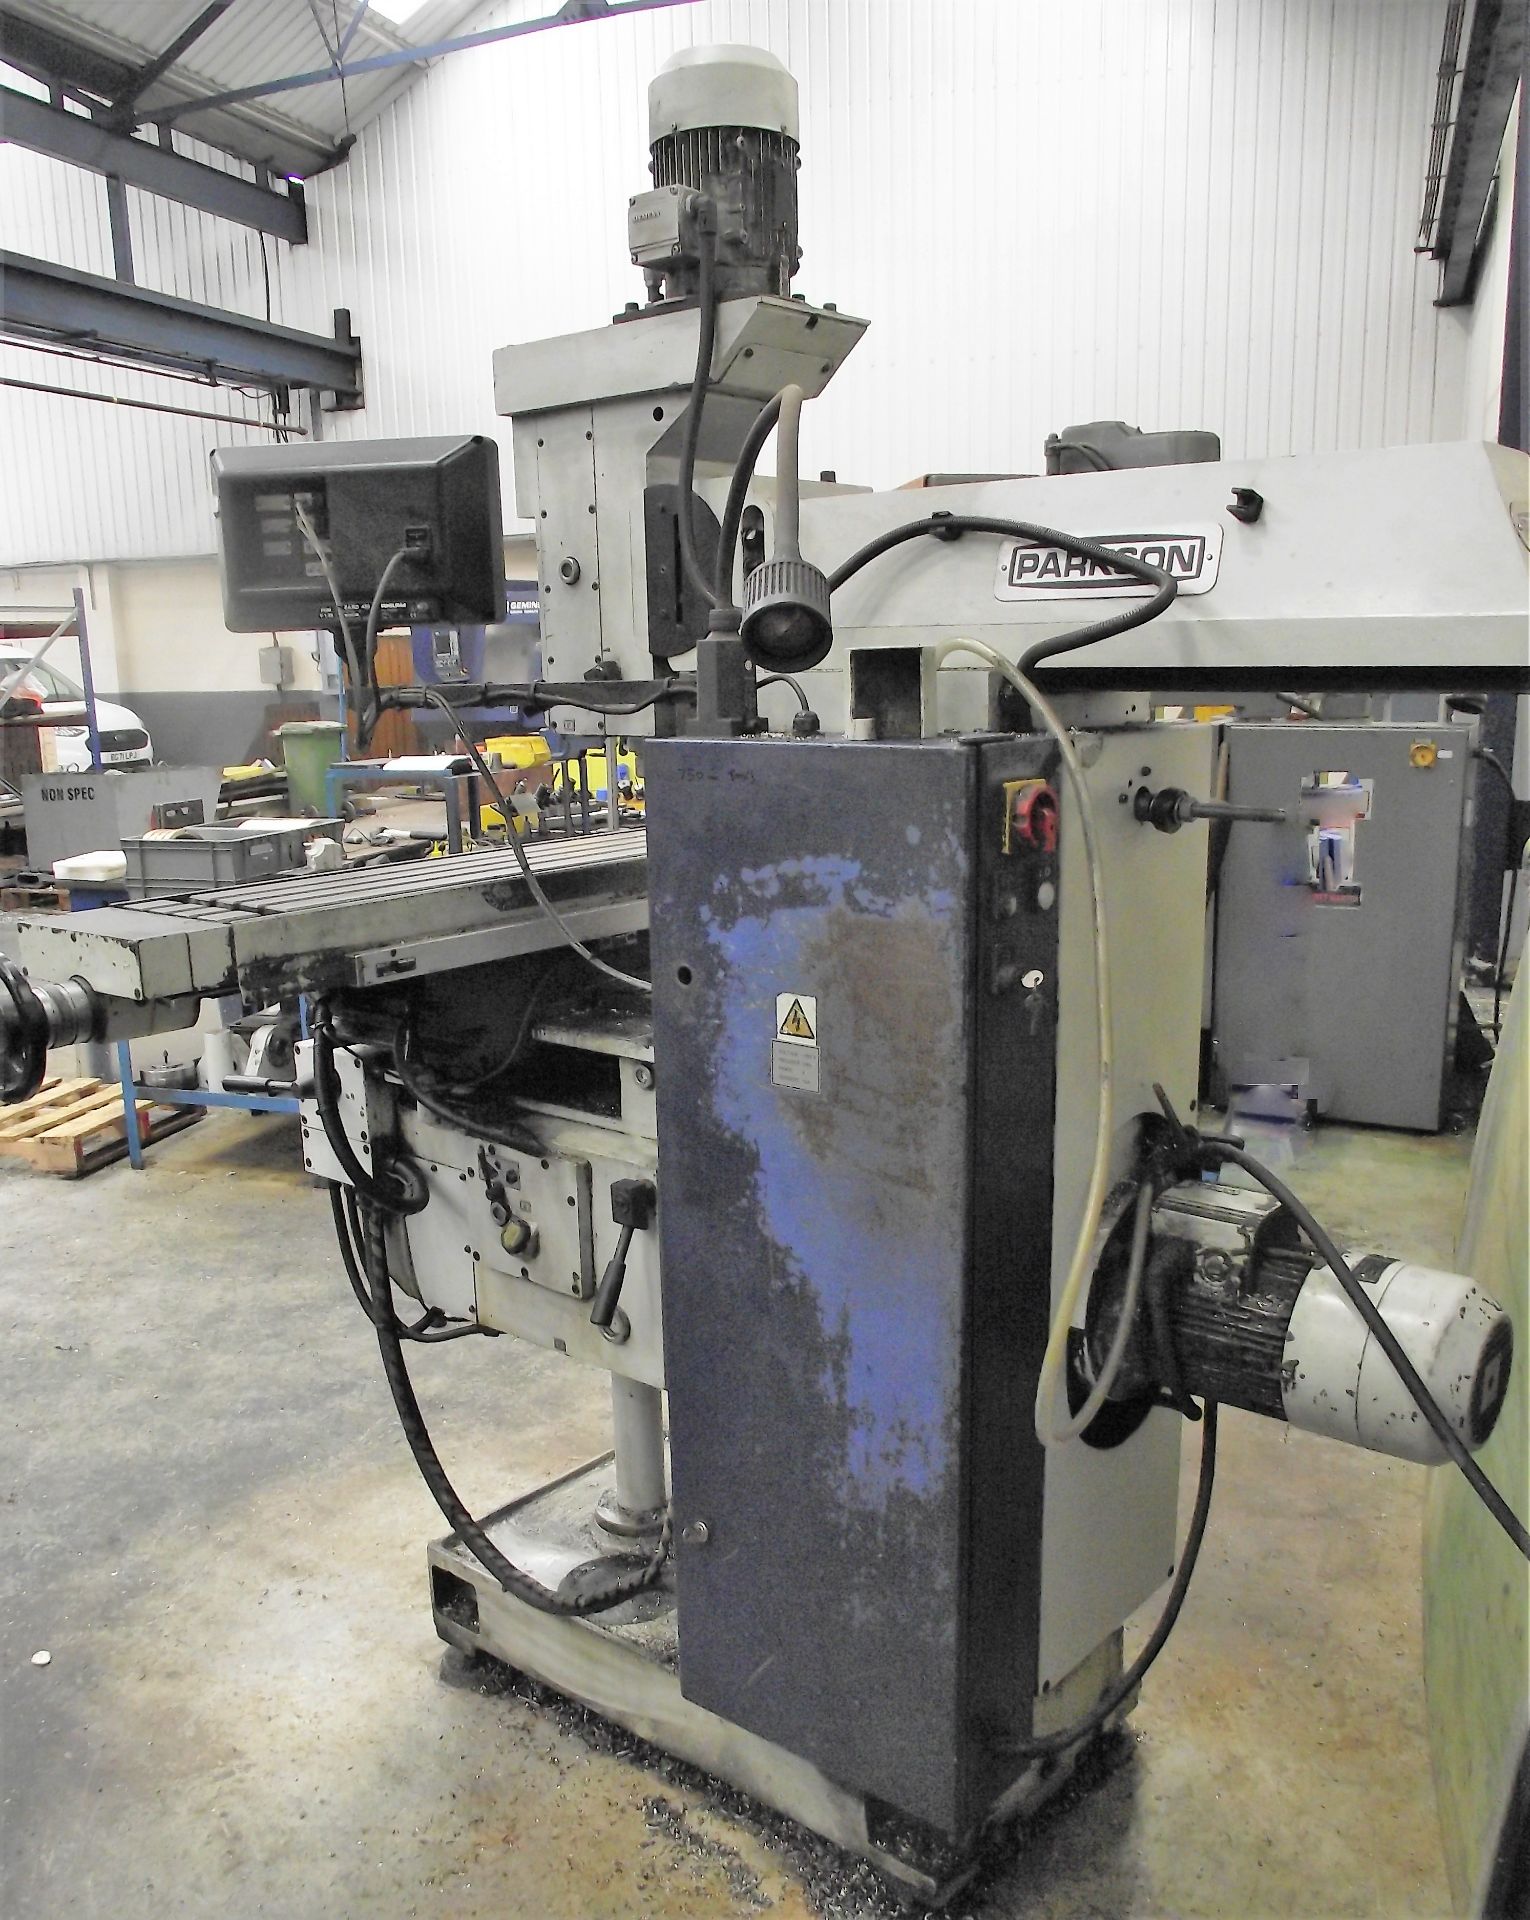 Parkson Milling Machine cw Anilam Wizard 2 Axis DRO - Image 17 of 23